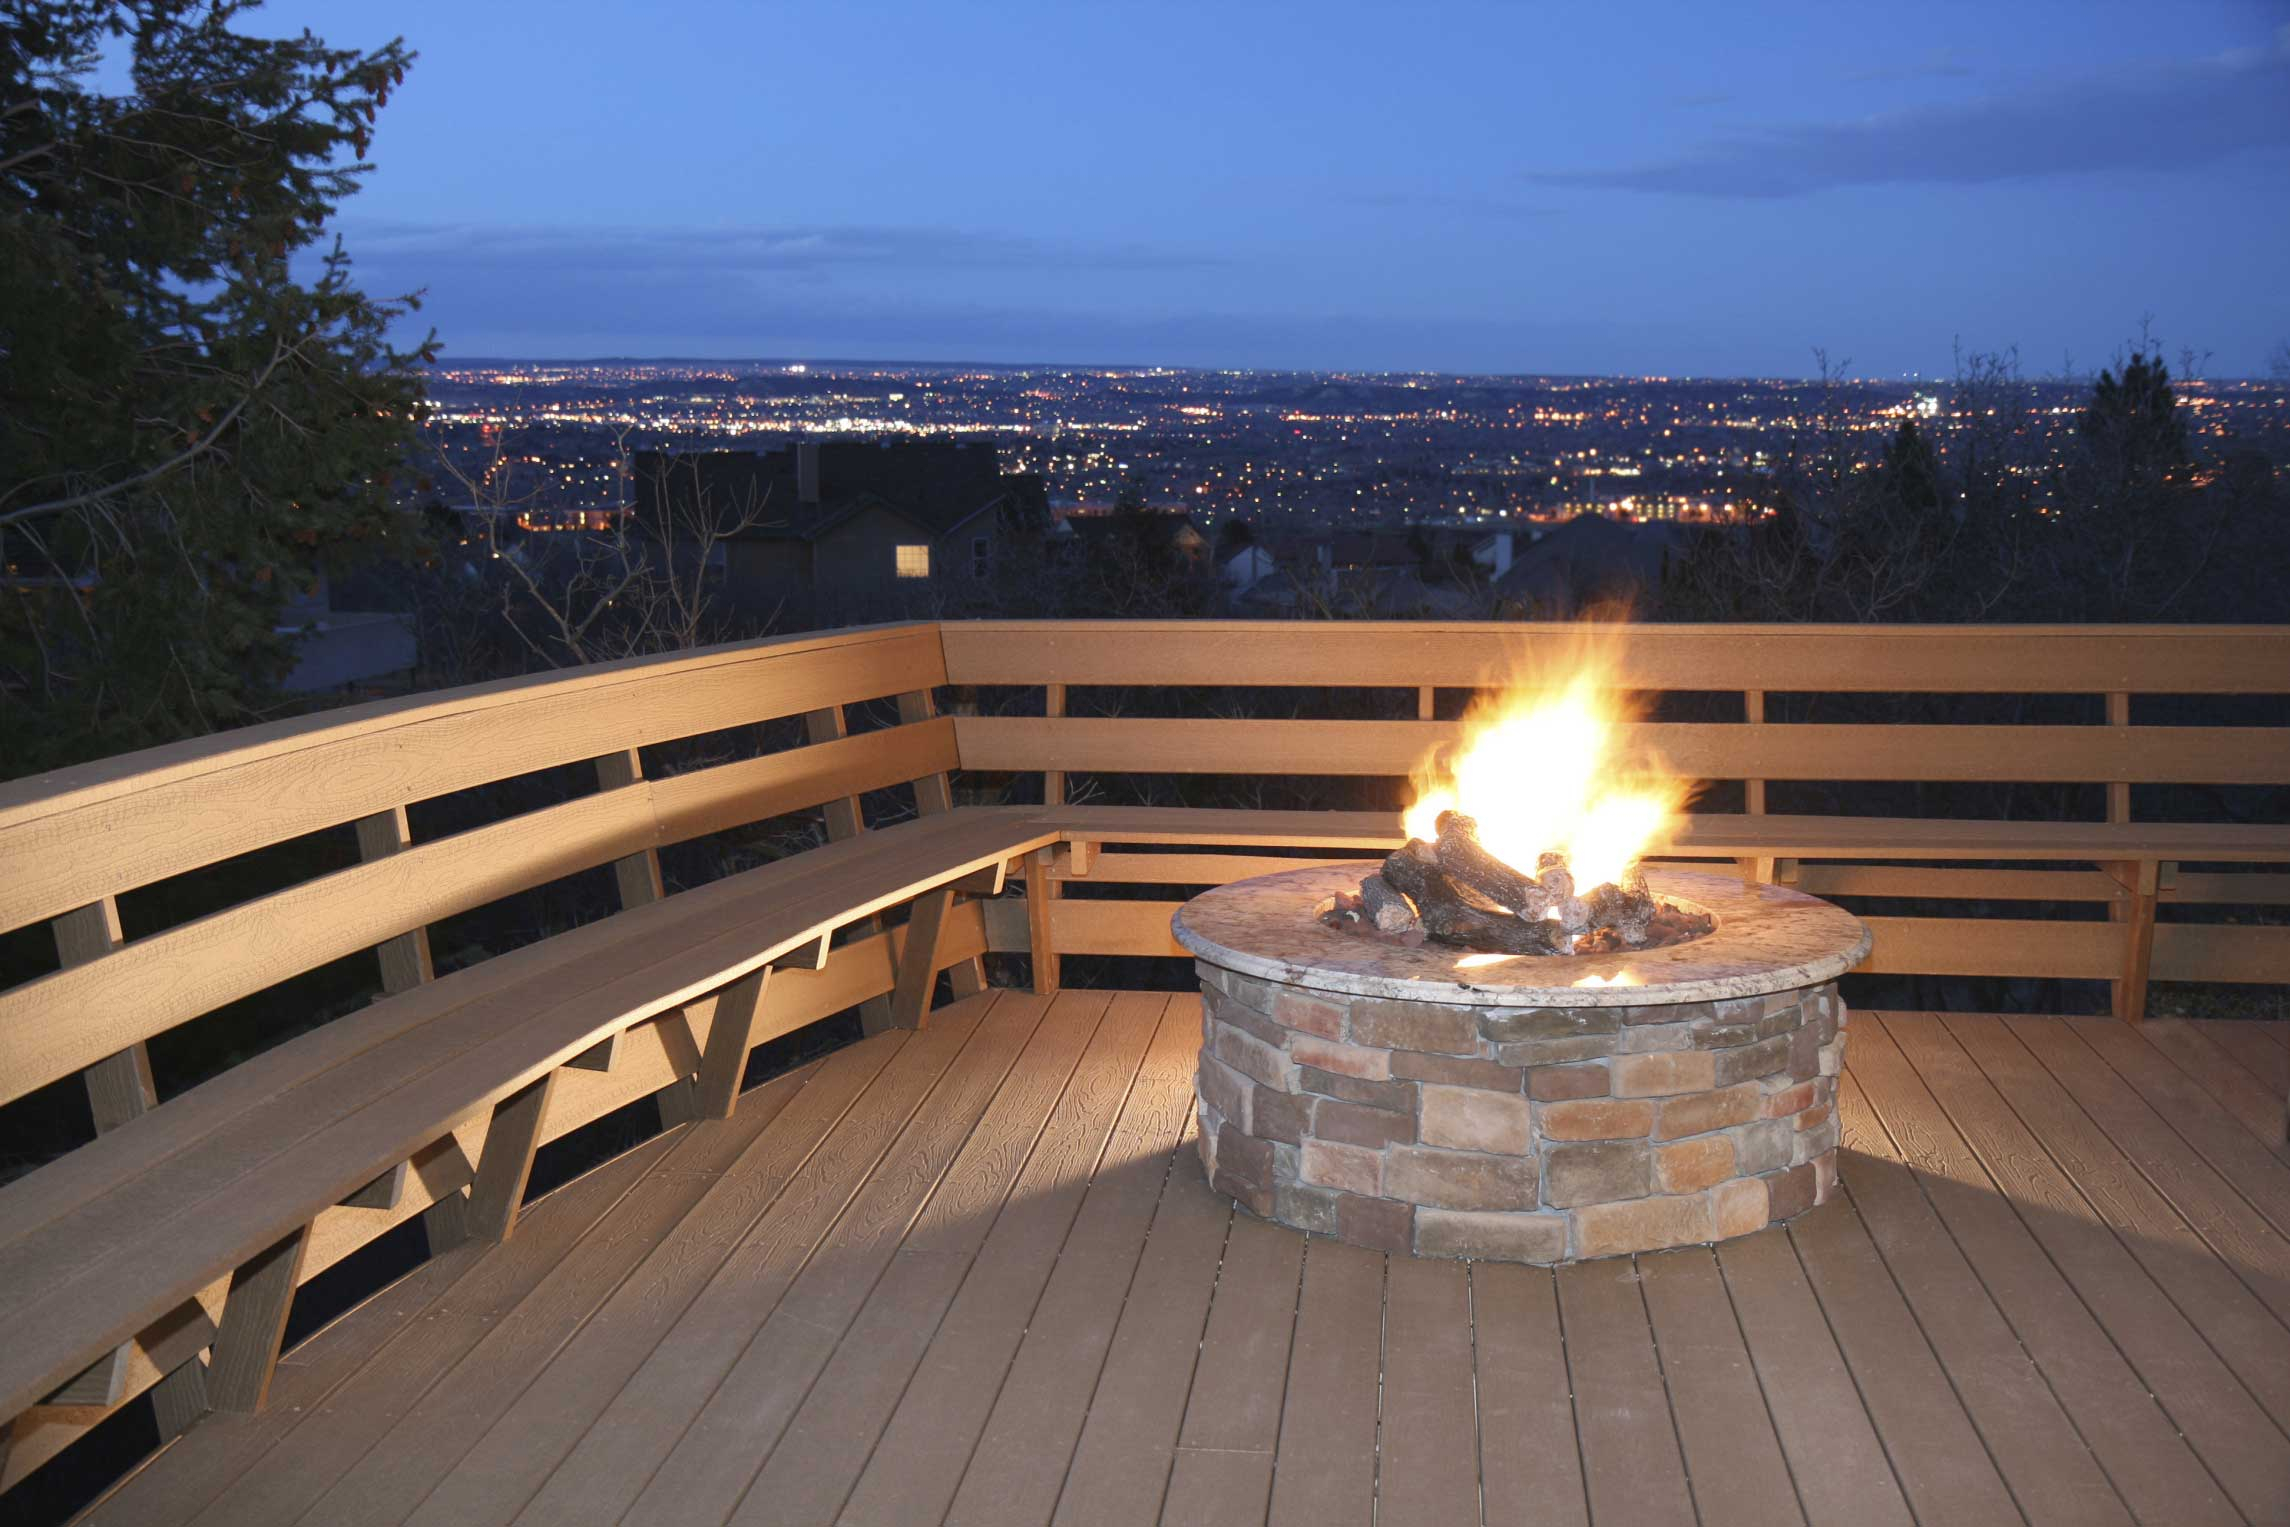 10 Most Popular Fire Pit On Deck Ideas outdoor deck fire pit design and ideas 2022